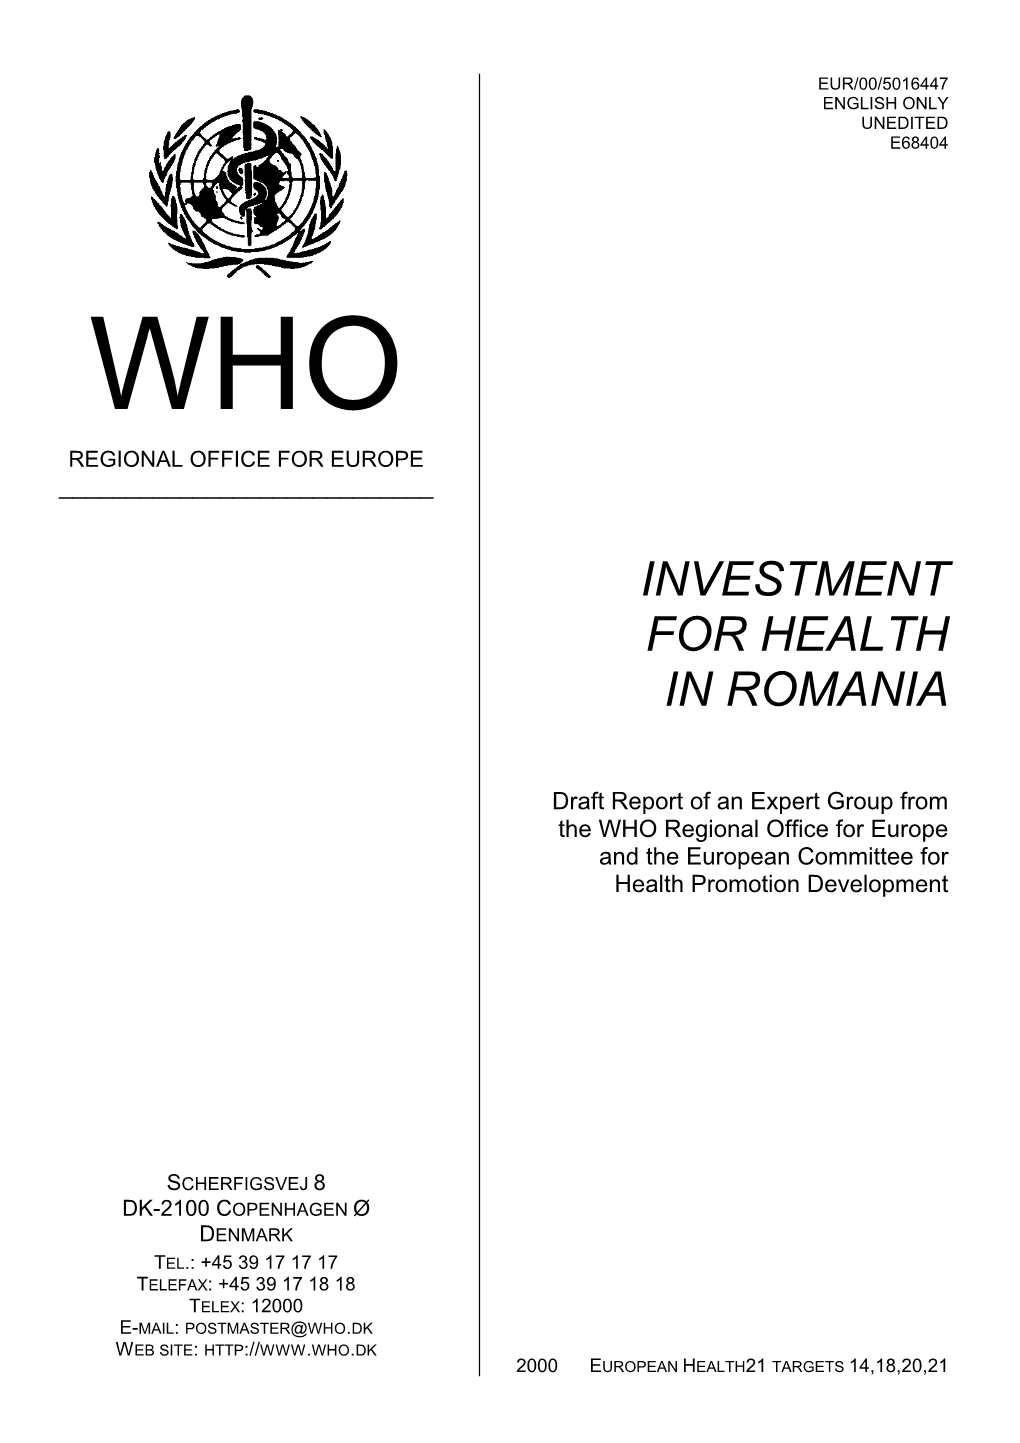 Investment for Health in Romania